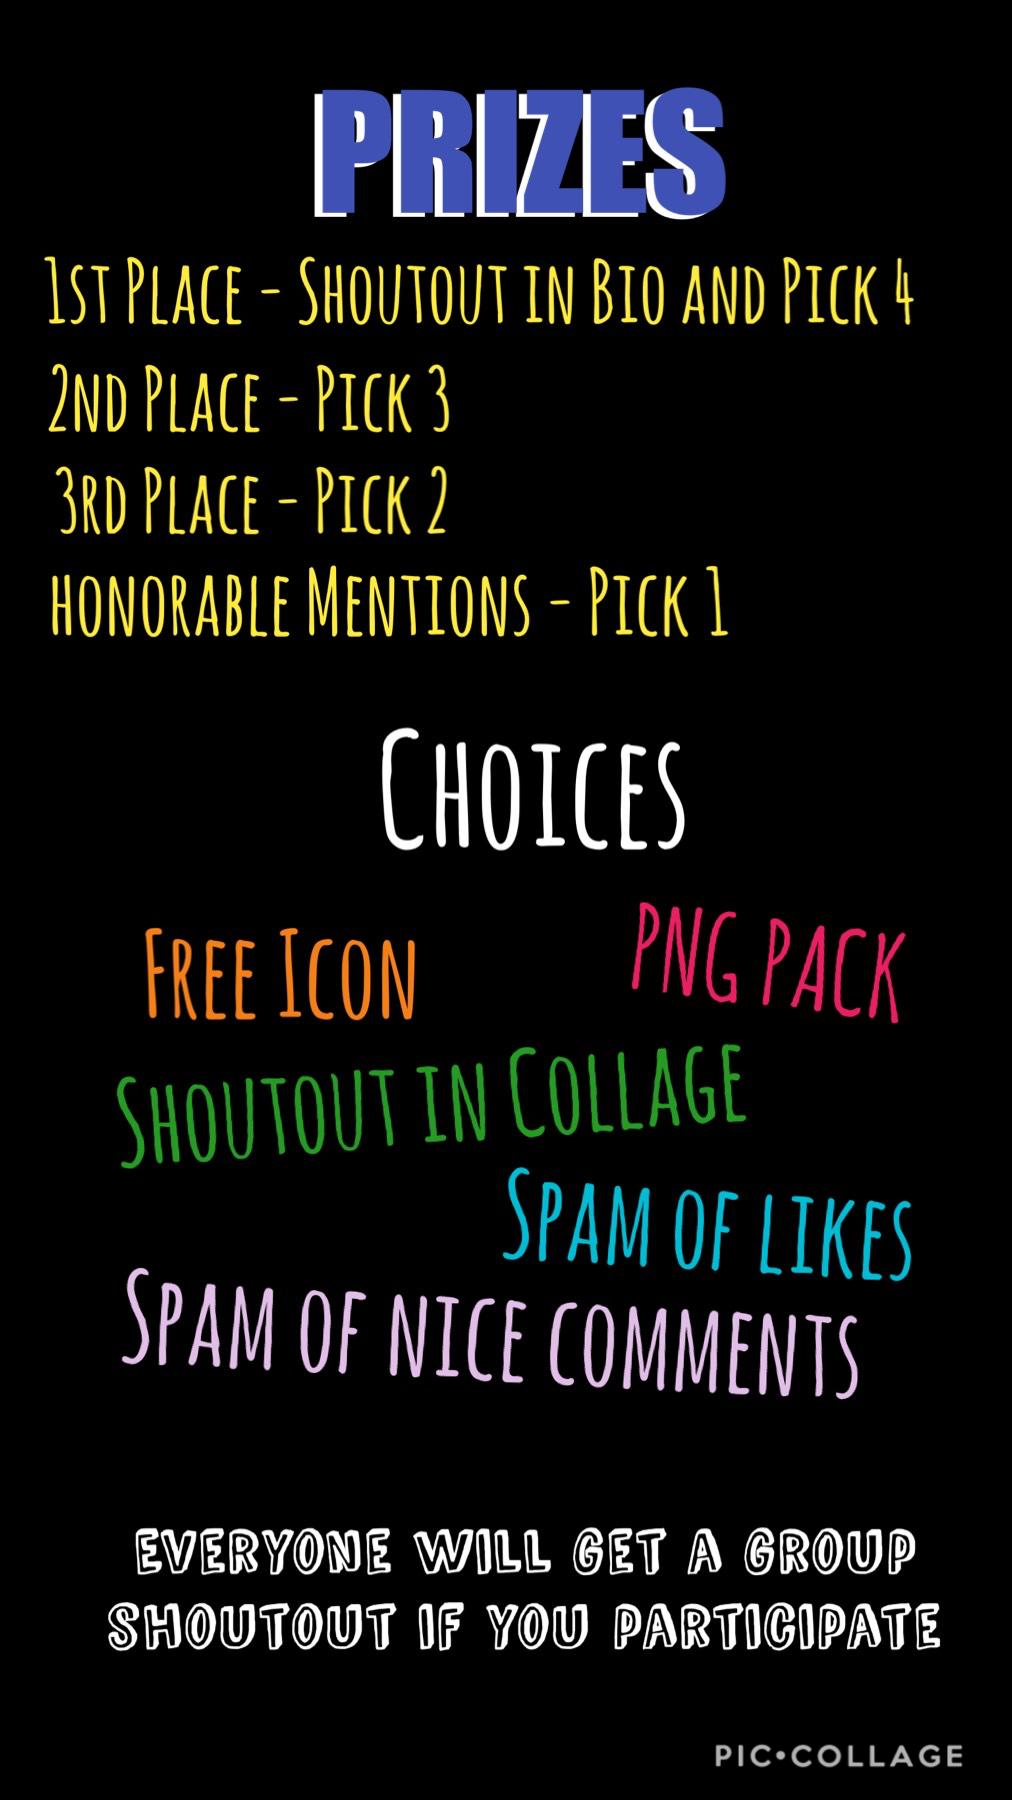 Prizes for Icon Contest 